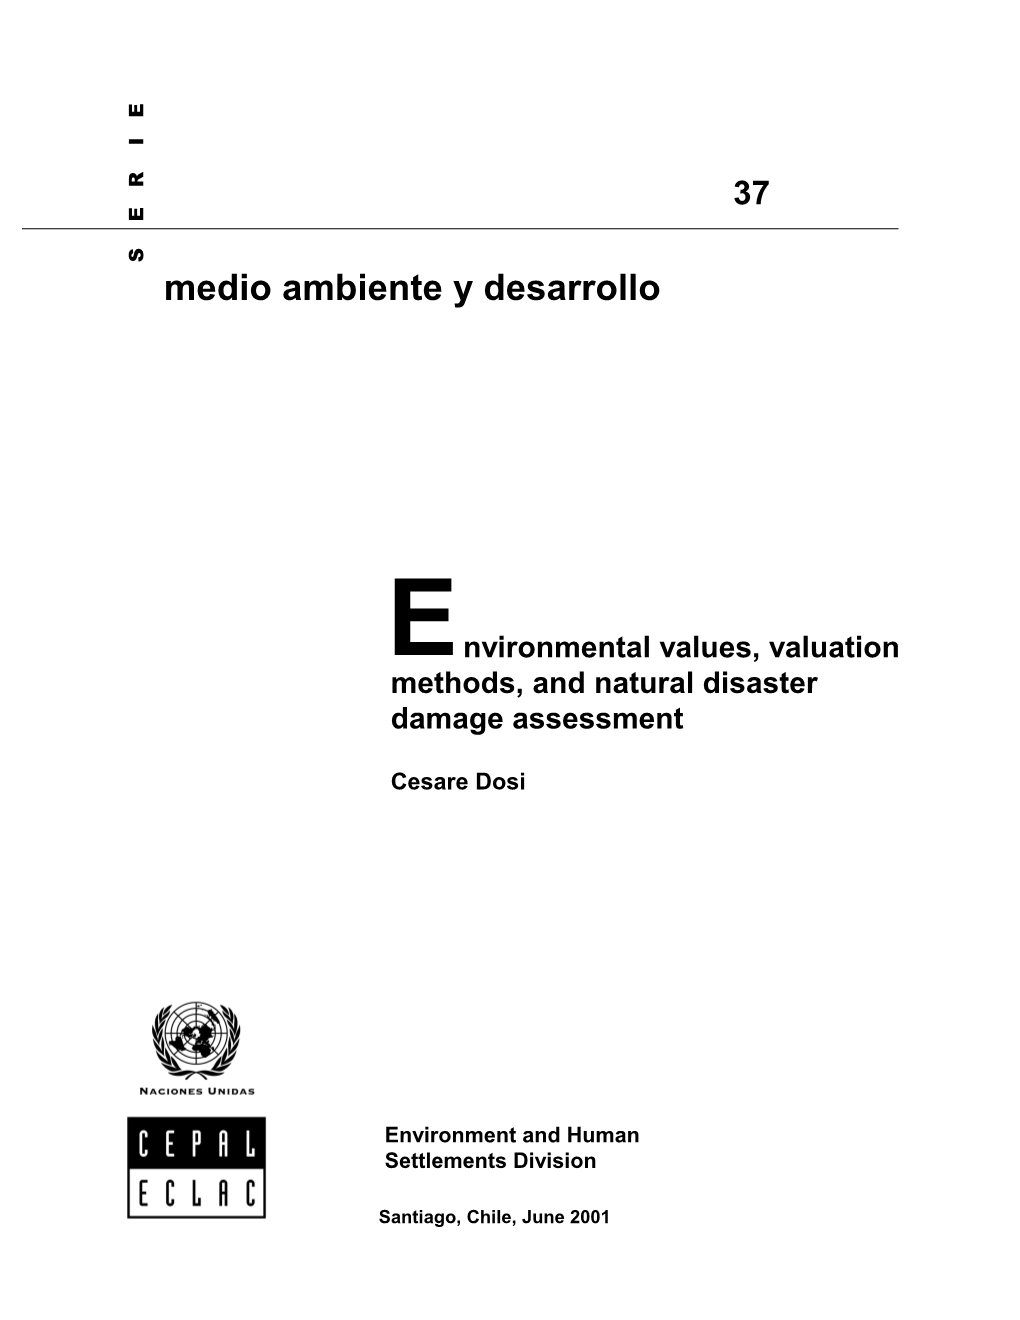 I. Environmental Values and Valuation Approaches